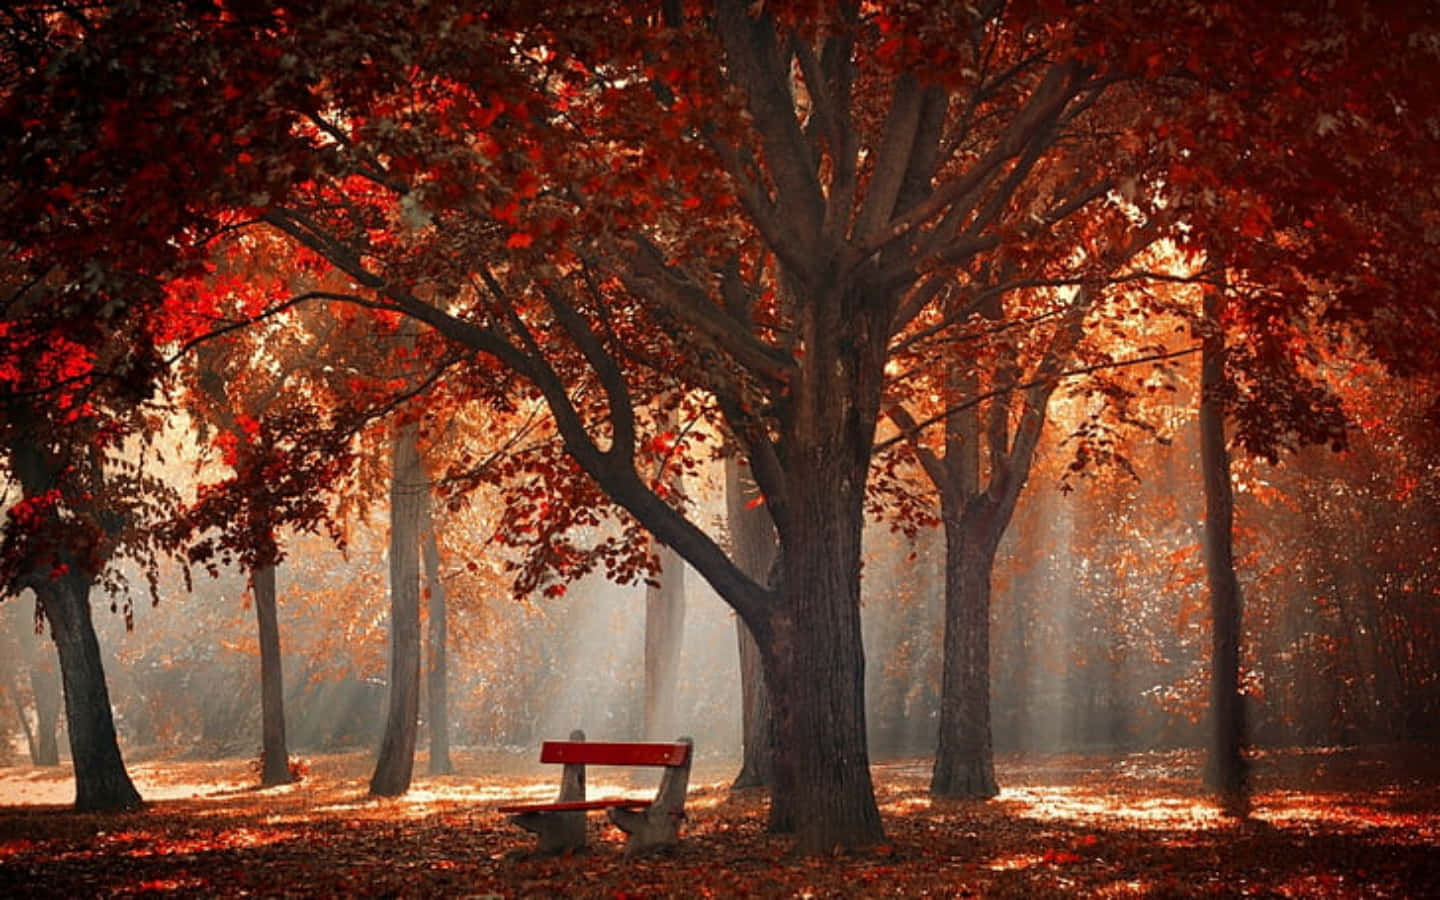 ____ Taking a break in the park on a beautiful fall day.